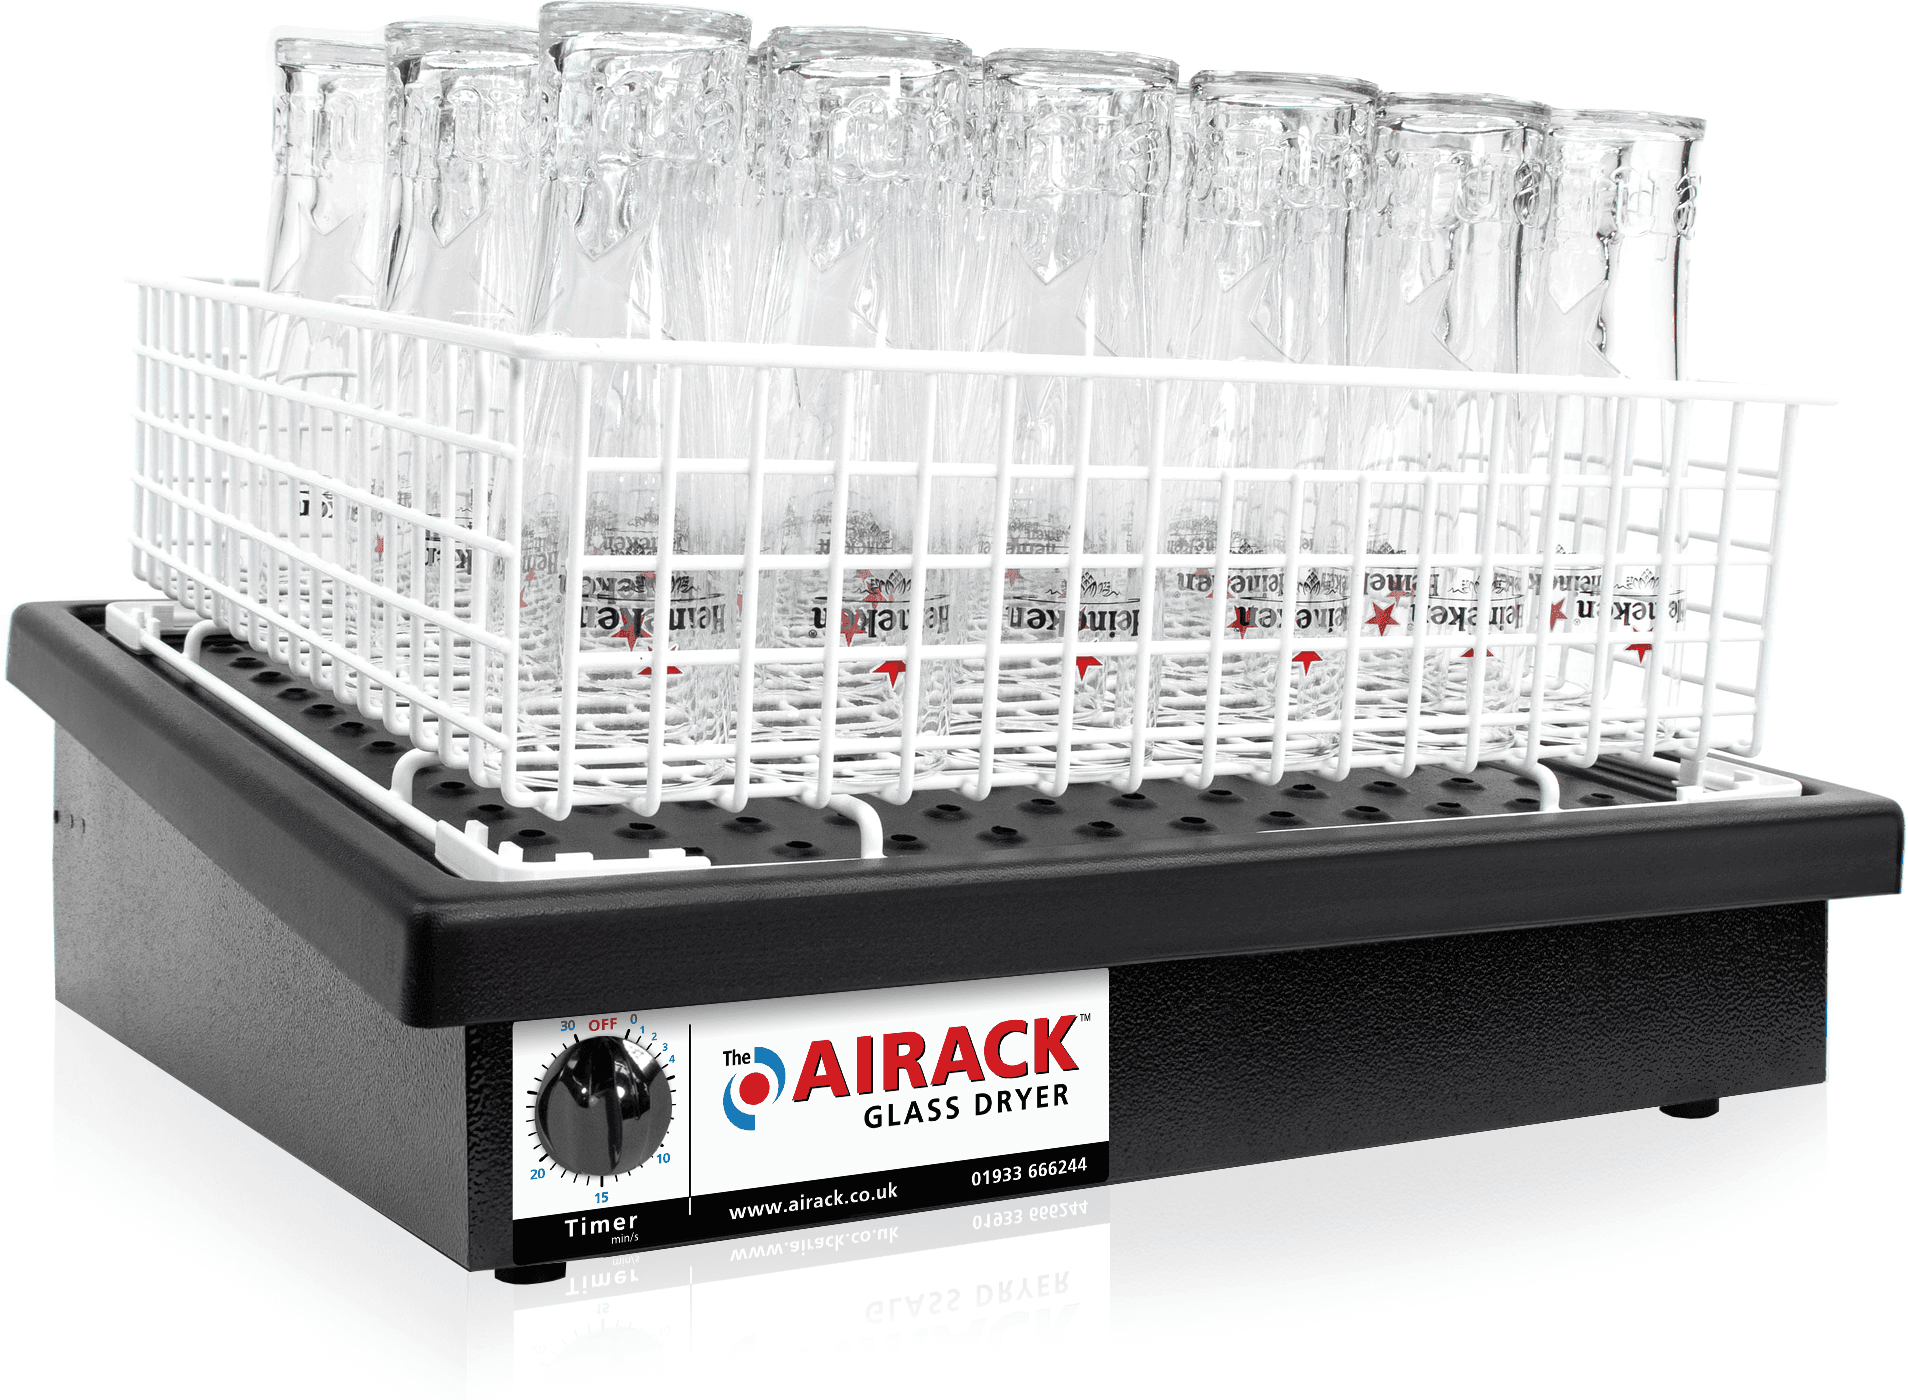 Clenaware Airack Automatic Glass Drying Rack for Baskets up to 500mm